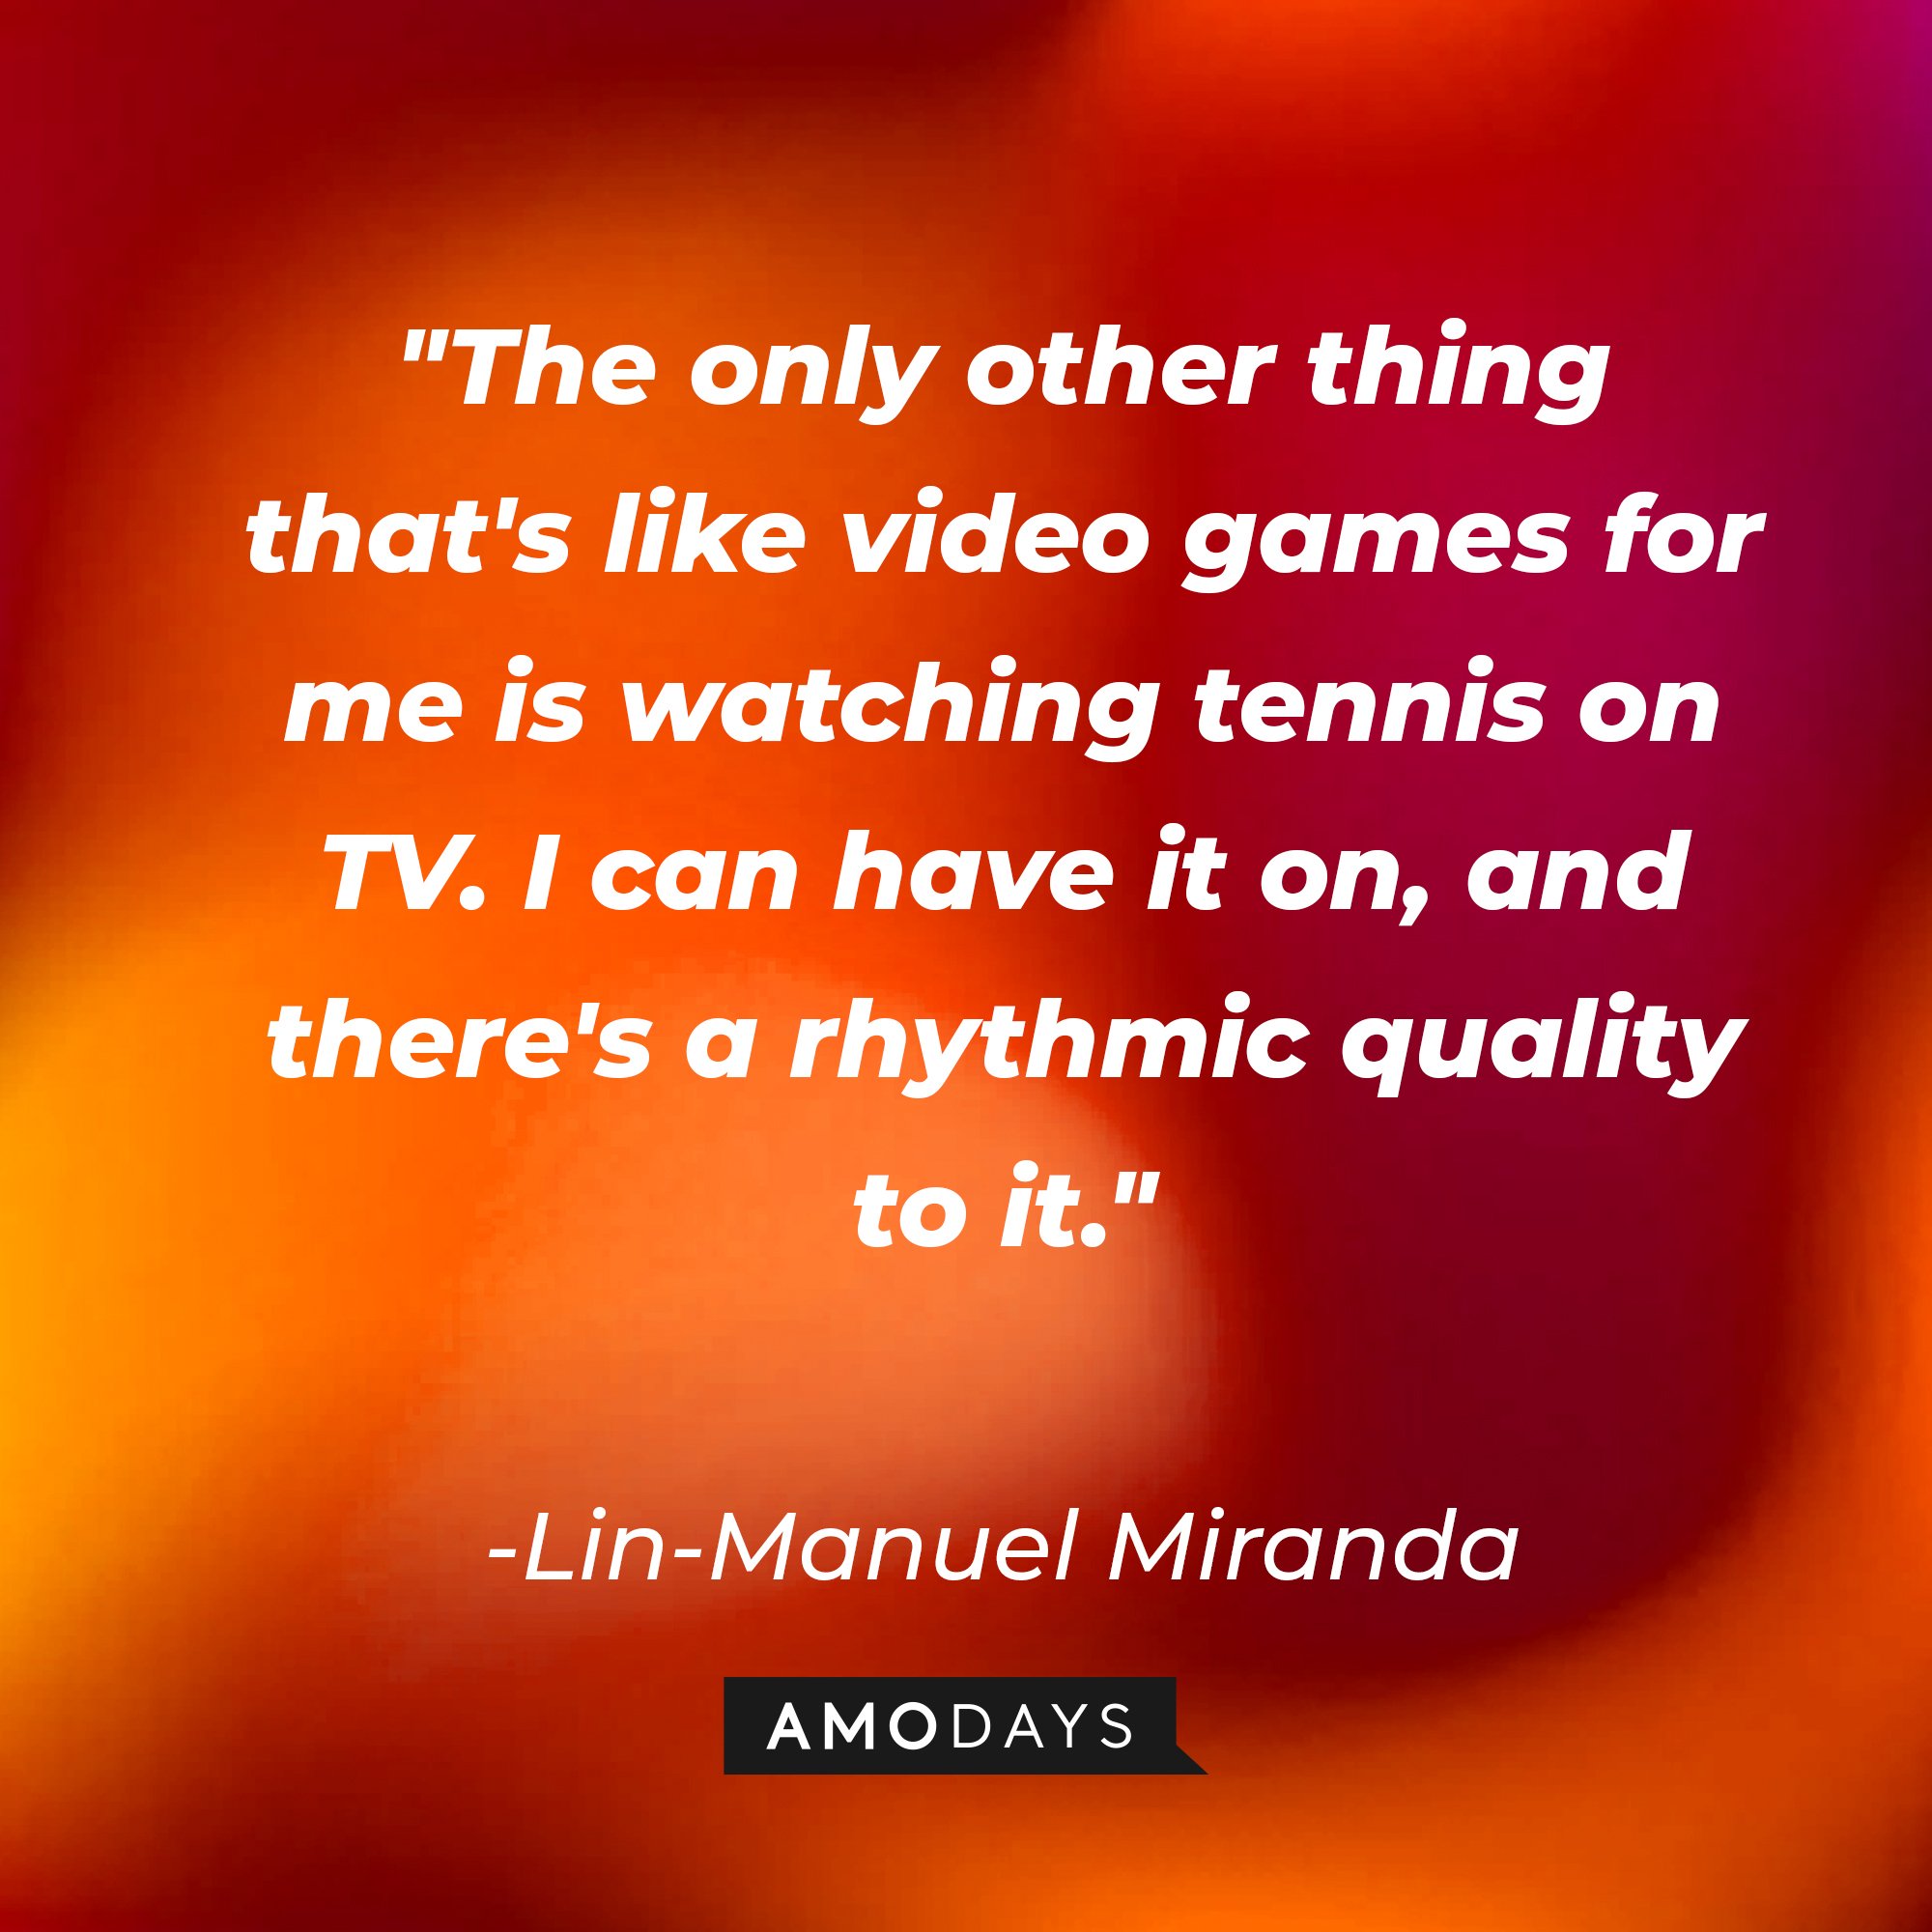 Lin-Manuel Miranda's quote: "The only other thing that's like video games for me is watching tennis on TV. I can have it on, and there's a rhythmic quality to it." | Image: AmoDays